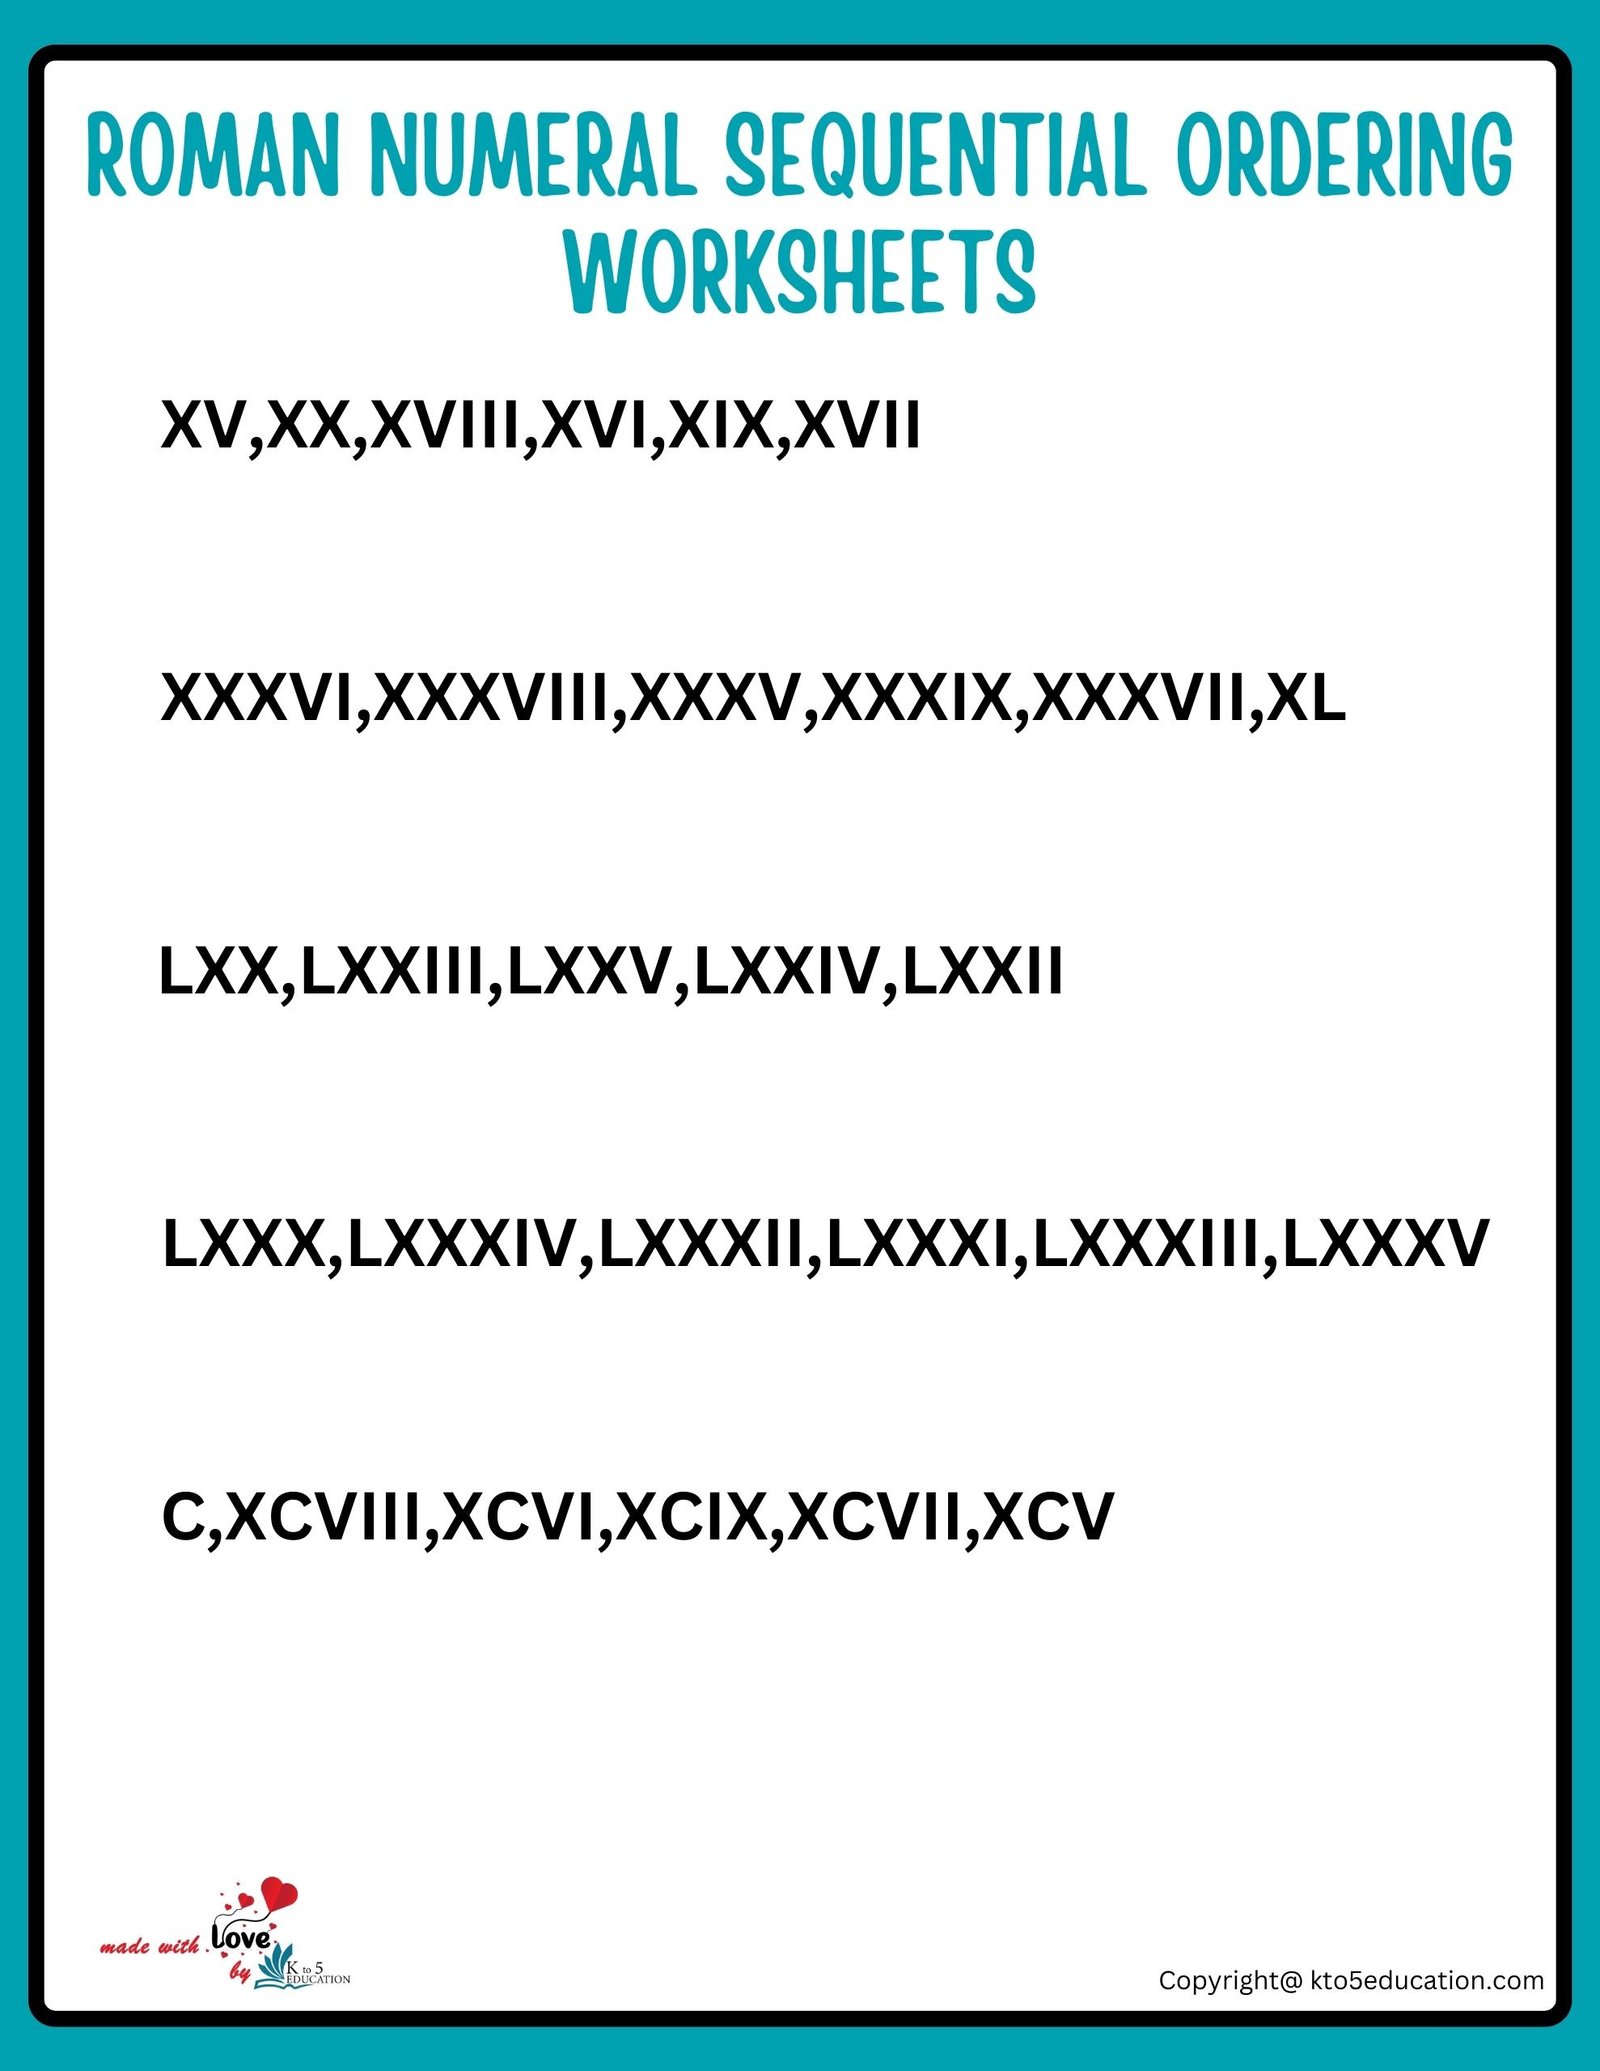 Roman Numeral Sequential Ordering Worksheets Roman Numeral Worksheets For Grade 3 1 TO 100